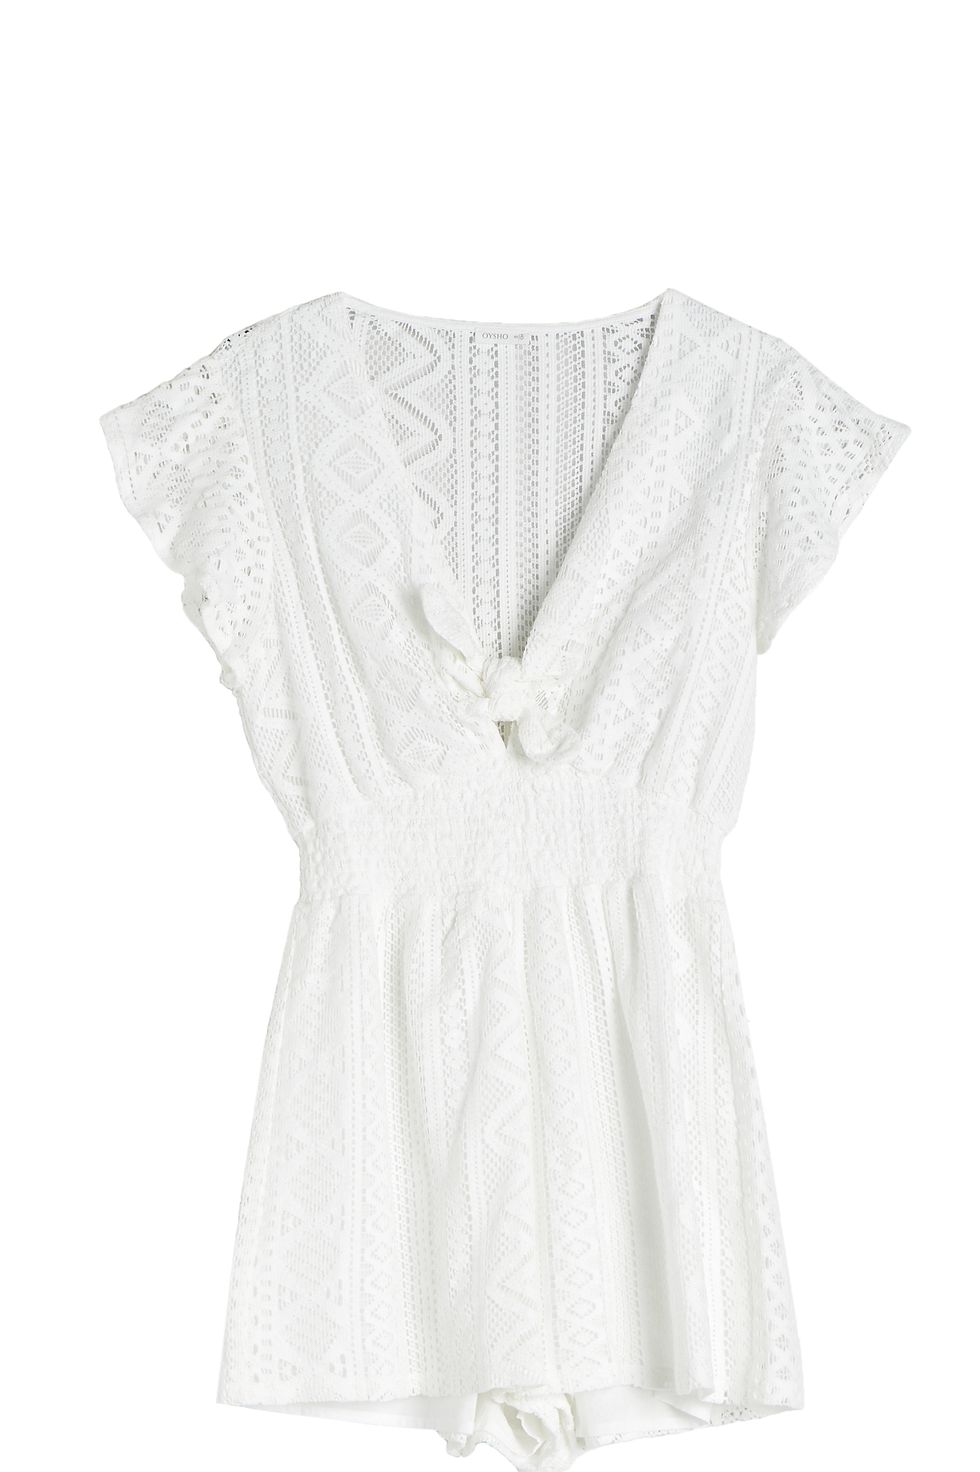 Clothing, White, Sleeve, Blouse, Dress, Outerwear, Neck, Top, T-shirt, Lace, 